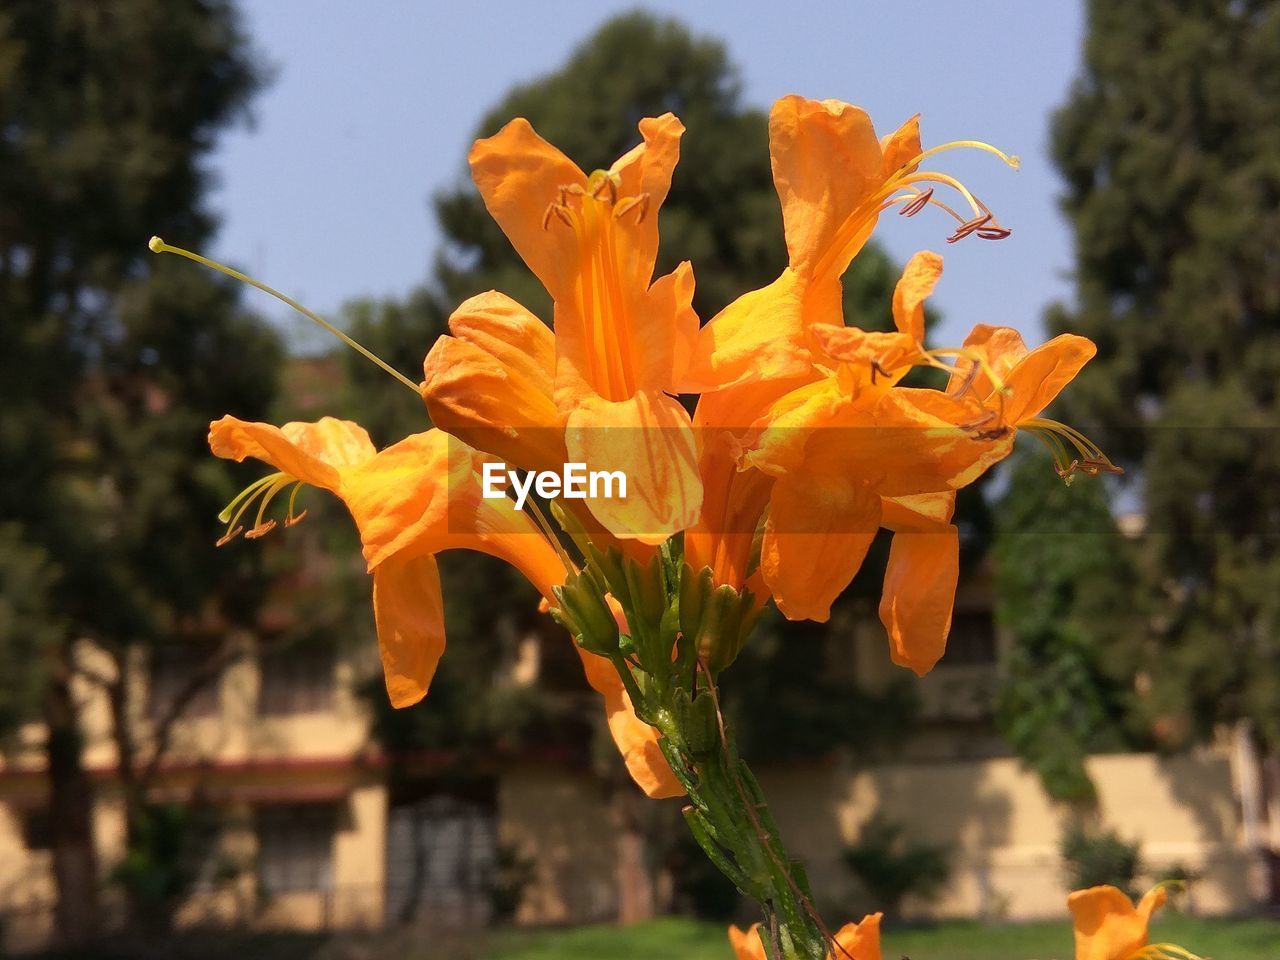 CLOSE-UP OF ORANGE DAY LILY BLOOMING AGAINST TREES